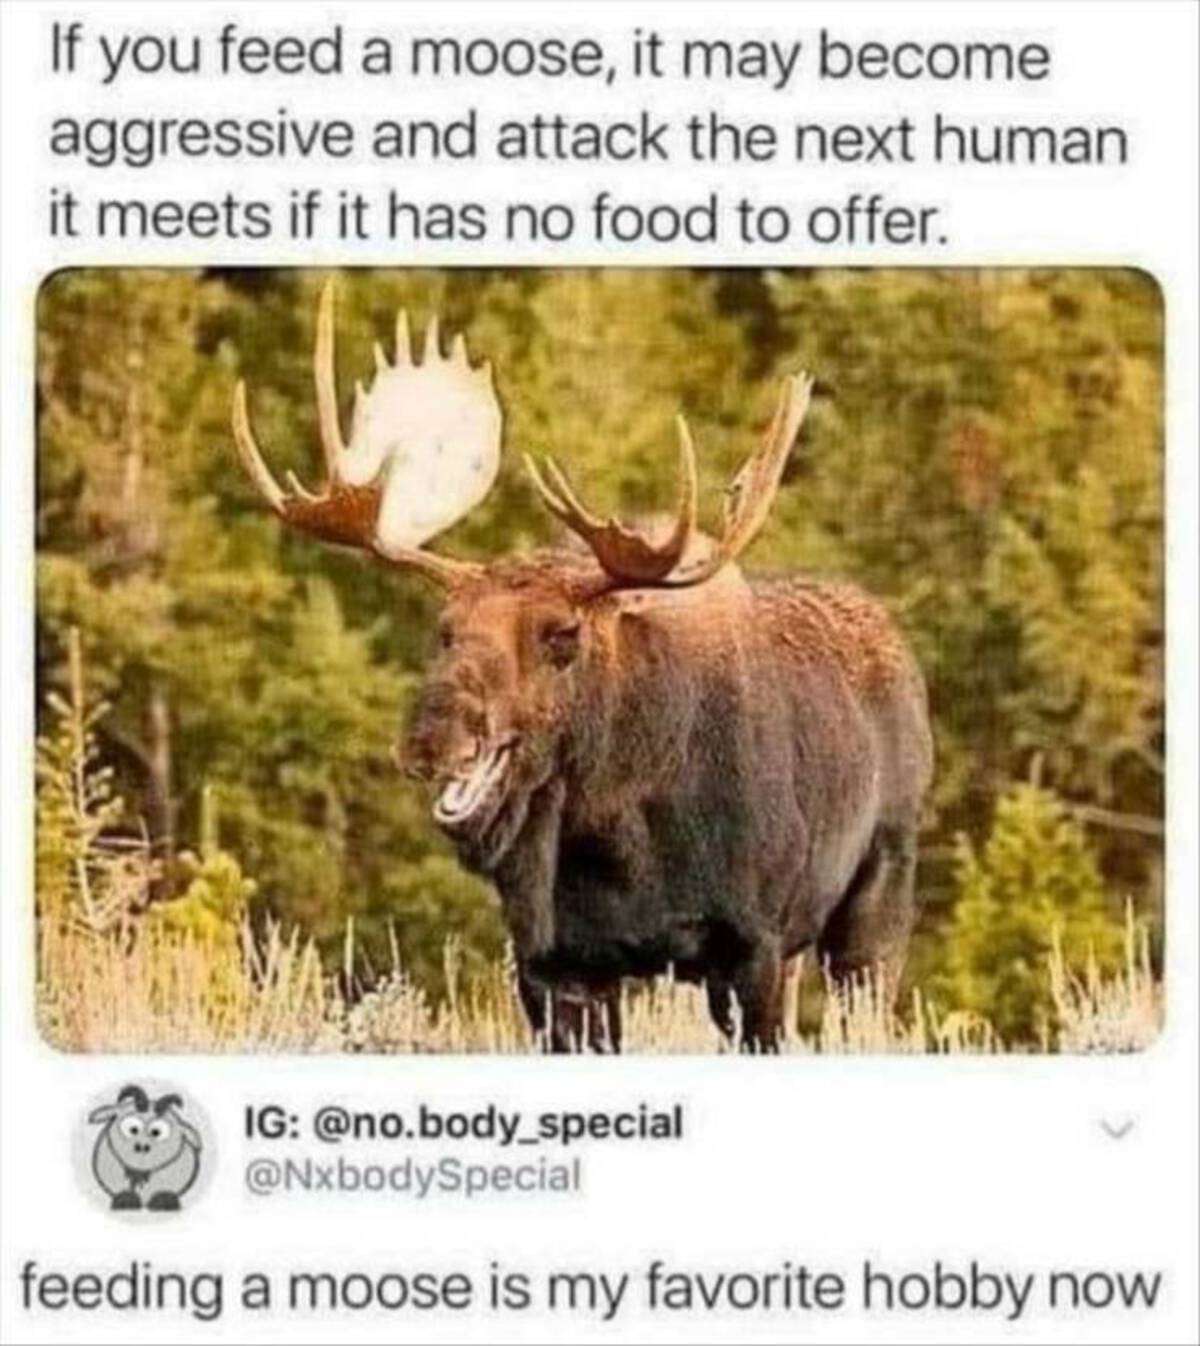 moose memes - If you feed a moose, it may become aggressive and attack the next human it meets if it has no food to offer. Ig .body_special feeding a moose is my favorite hobby now